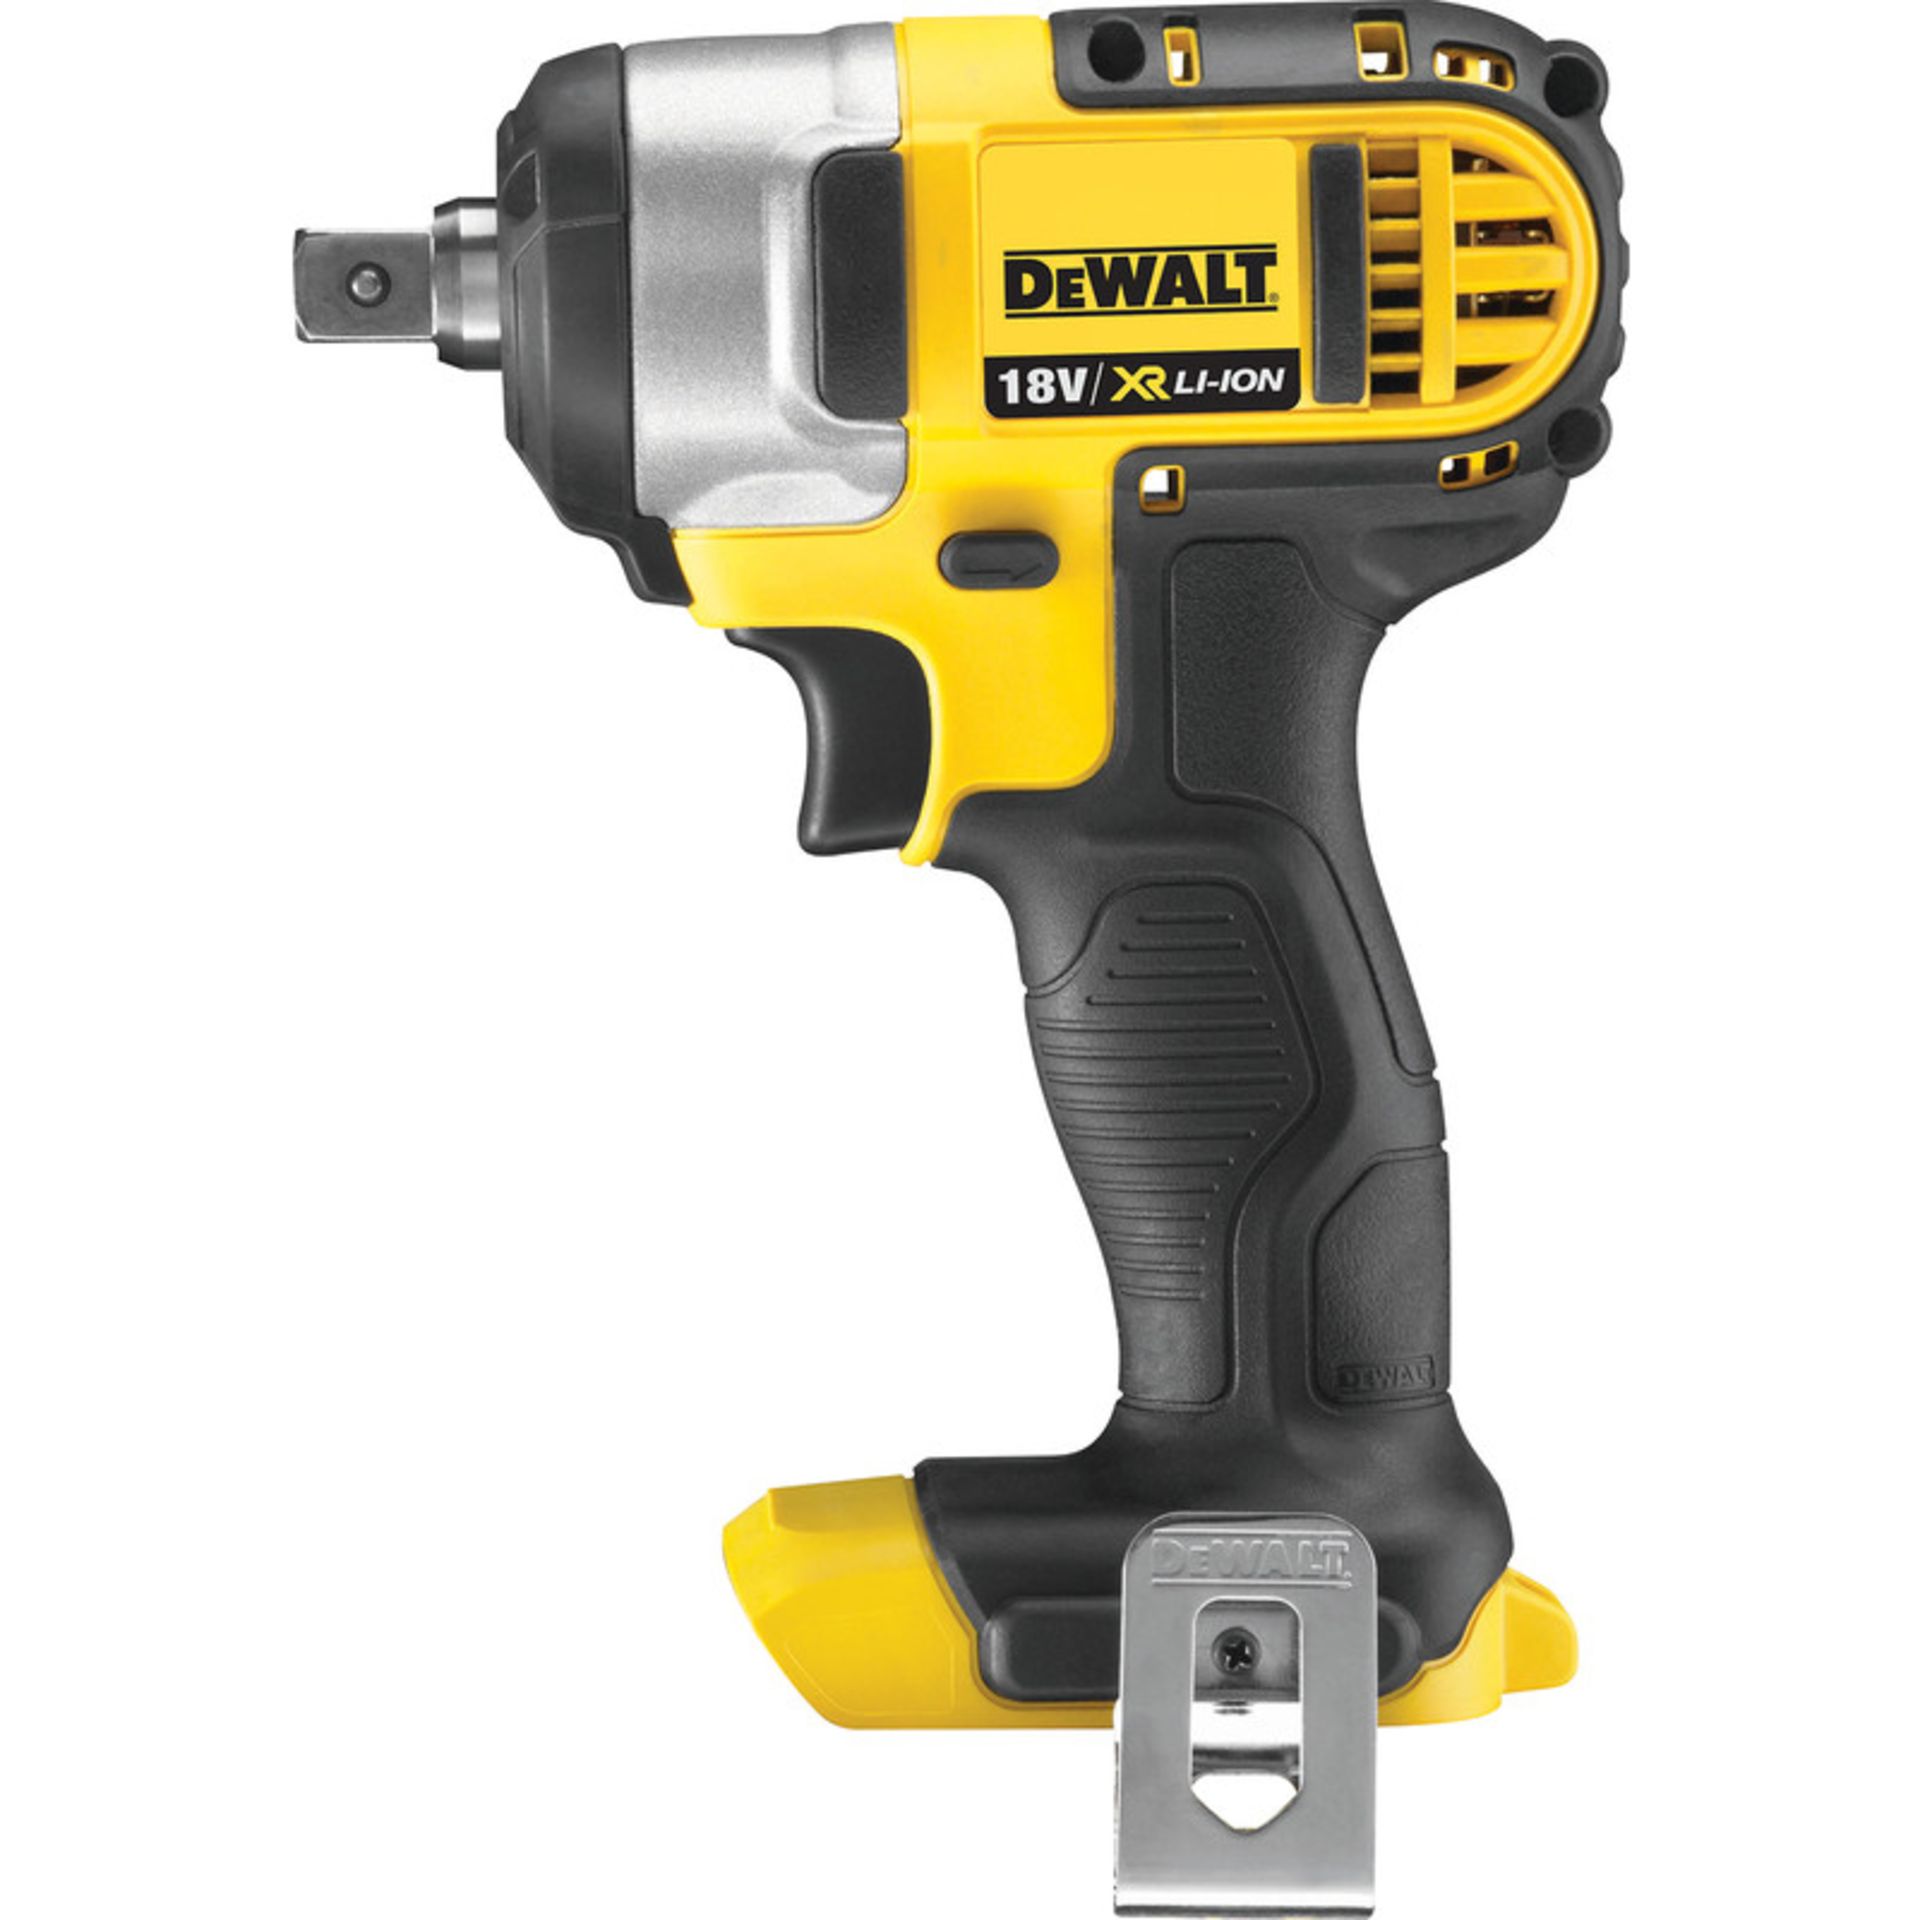 V Brand New DeWalt DCF880N 18V Lithium Ion Body Only Compact Impact Wrench